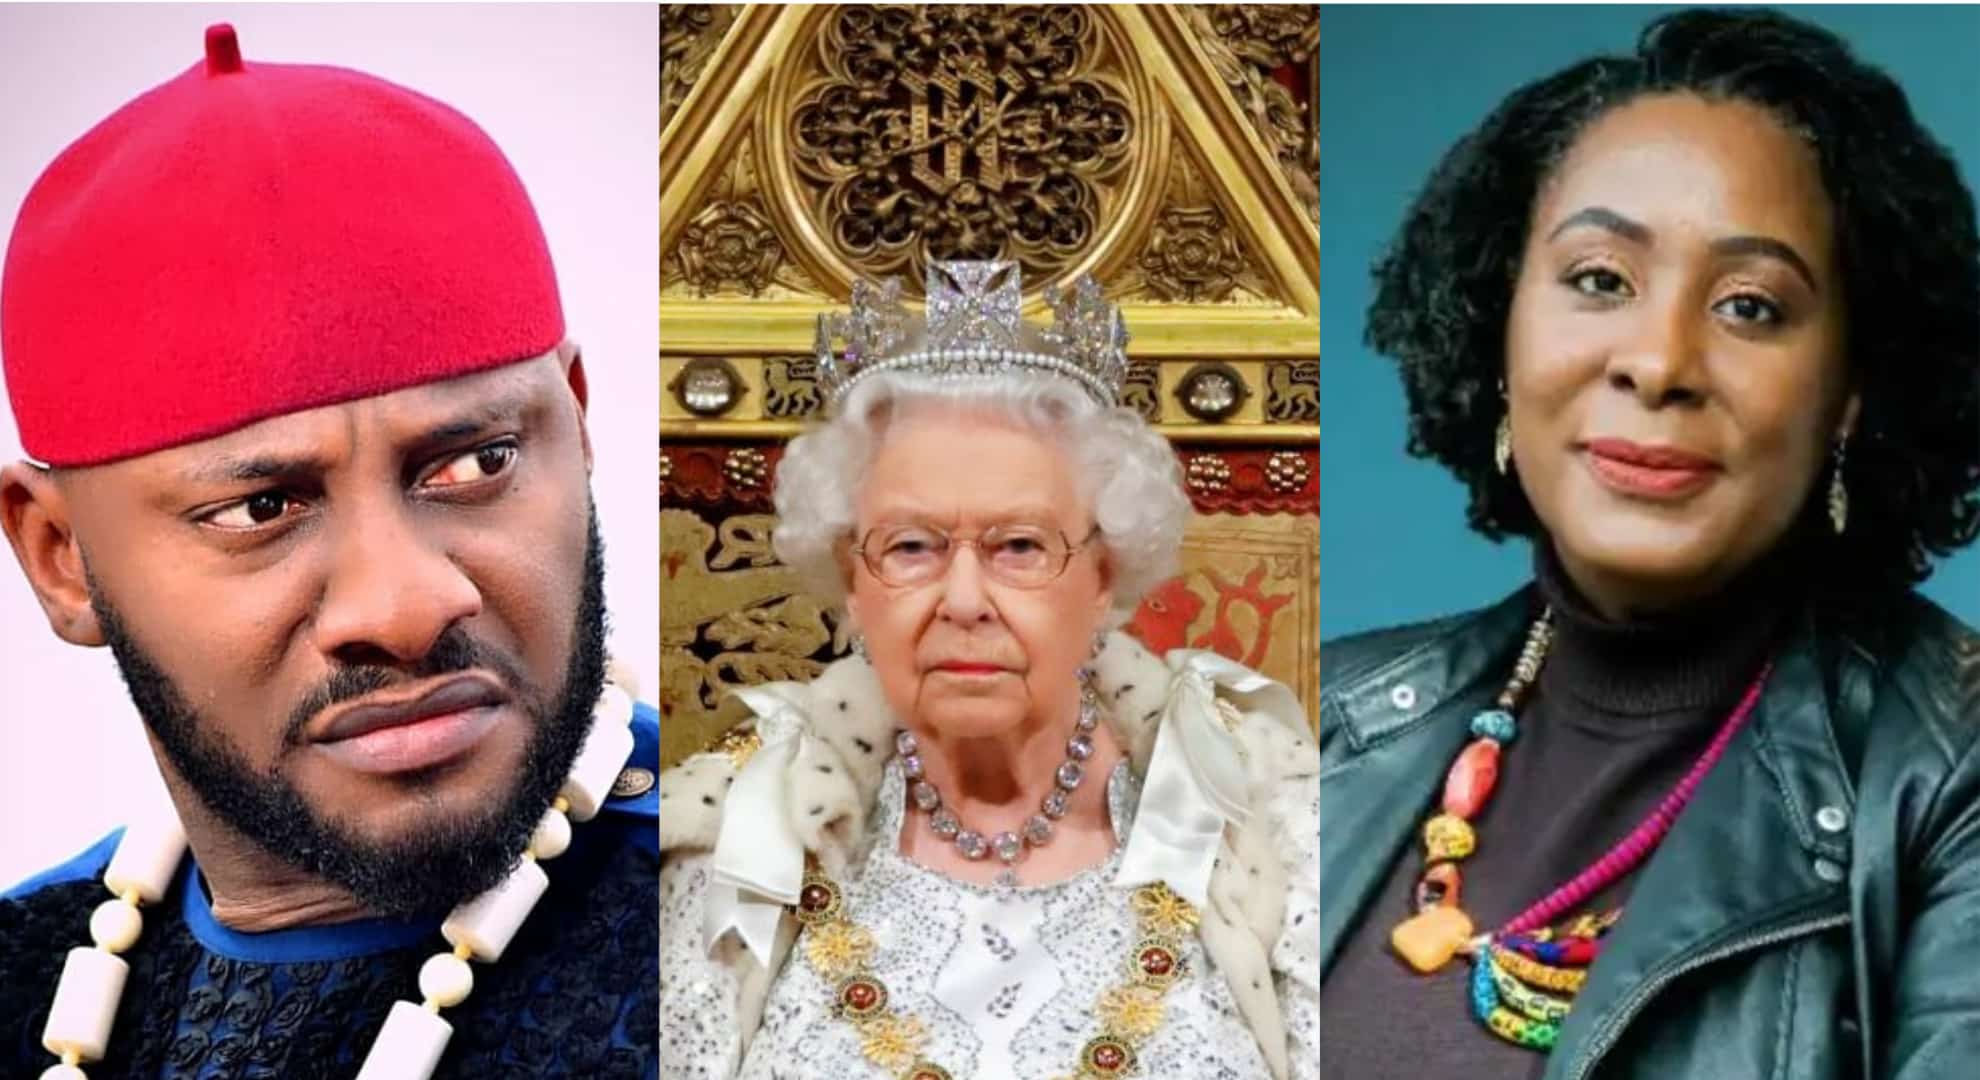 'Thank You For Speaking For Our People' - Yul Edochie Hails Anya Over Controversial Remarks On Queen’s Death